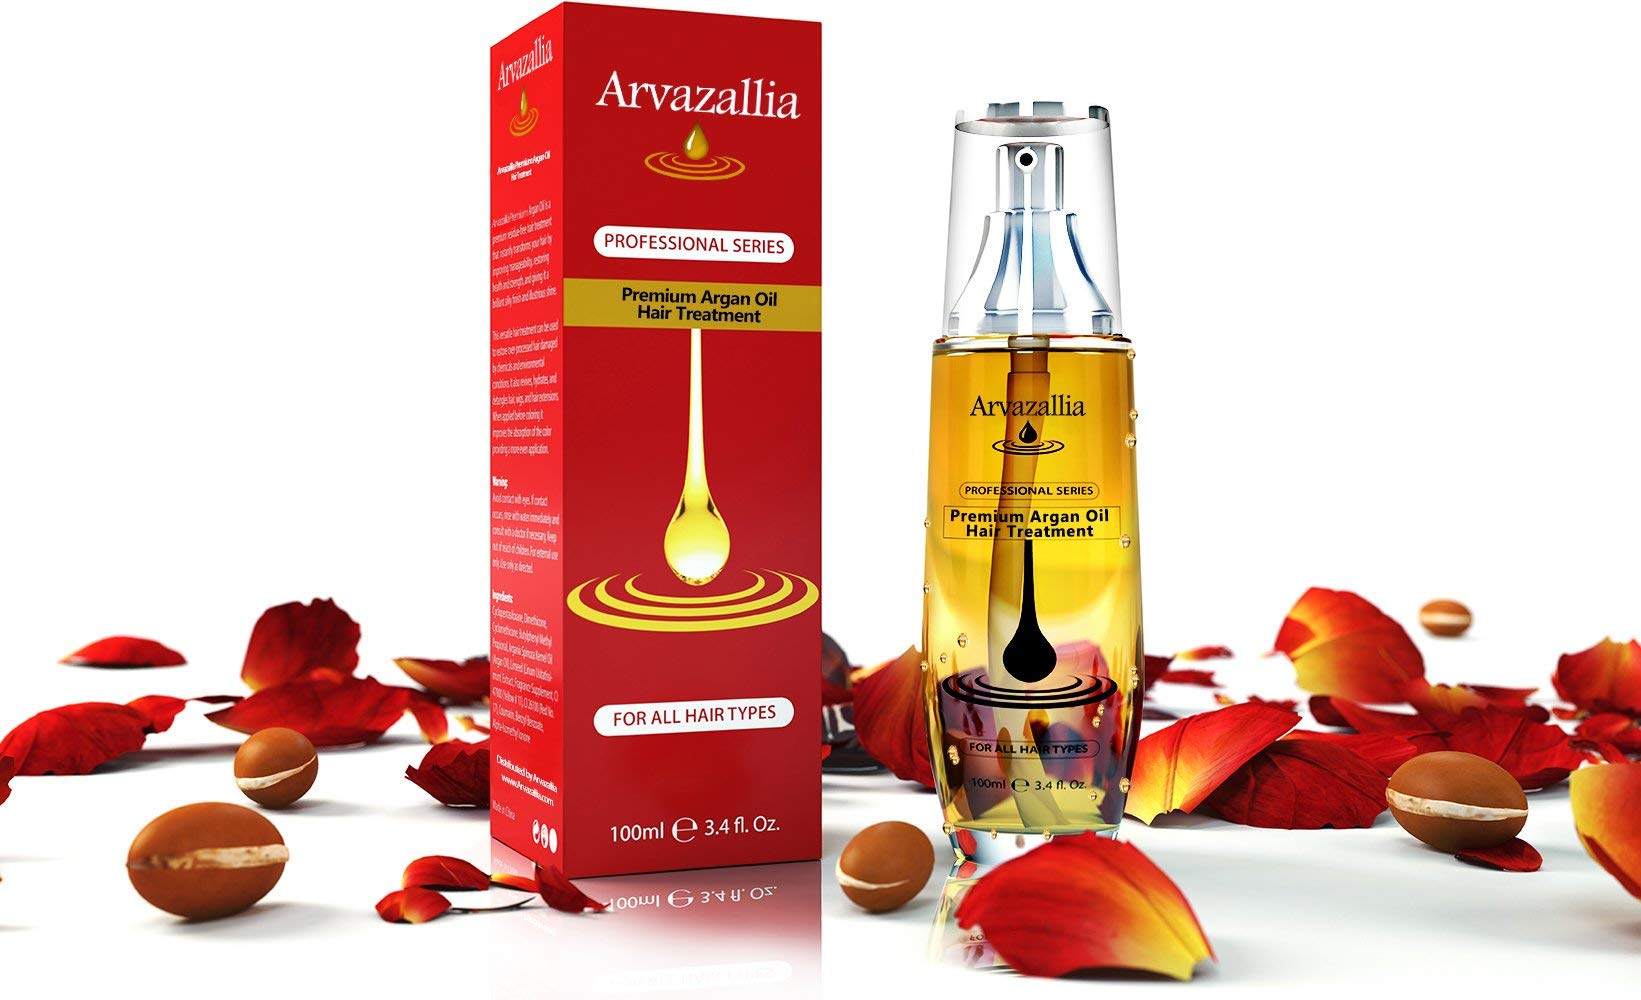 Arvazallia Hydrating Argan Oil Hair Mask, Protein Hair Mask, and Premium Argan Oil Hair Treatment Bundle - The Ultimate Hydration and Hair Repair Products for Damaged Hair or Dry Hair